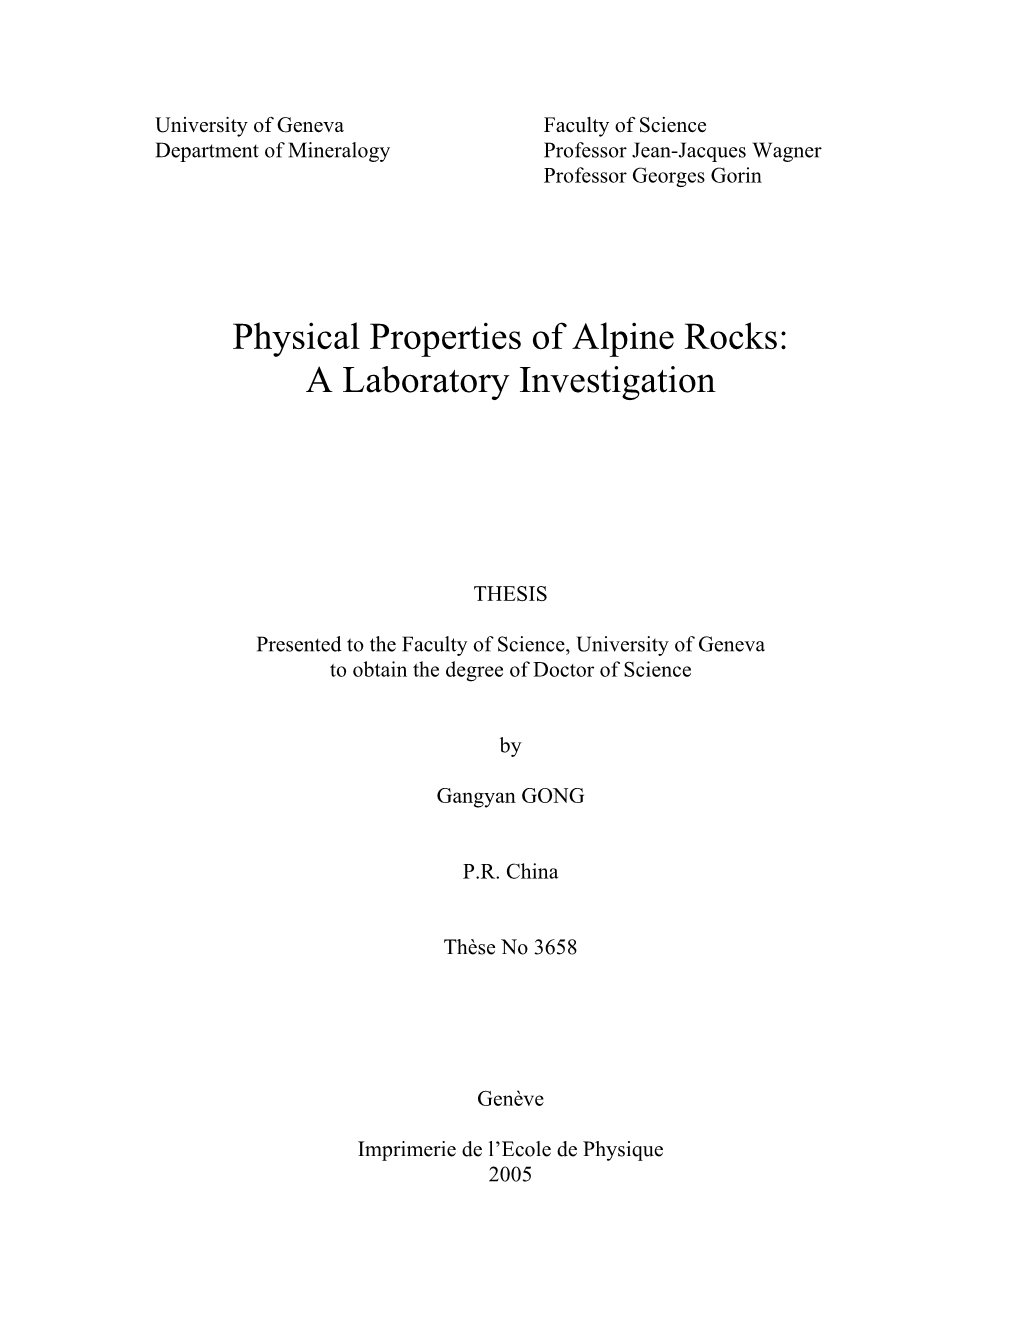 Physical Properties of Alpine Rocks: a Laboratory Investigation